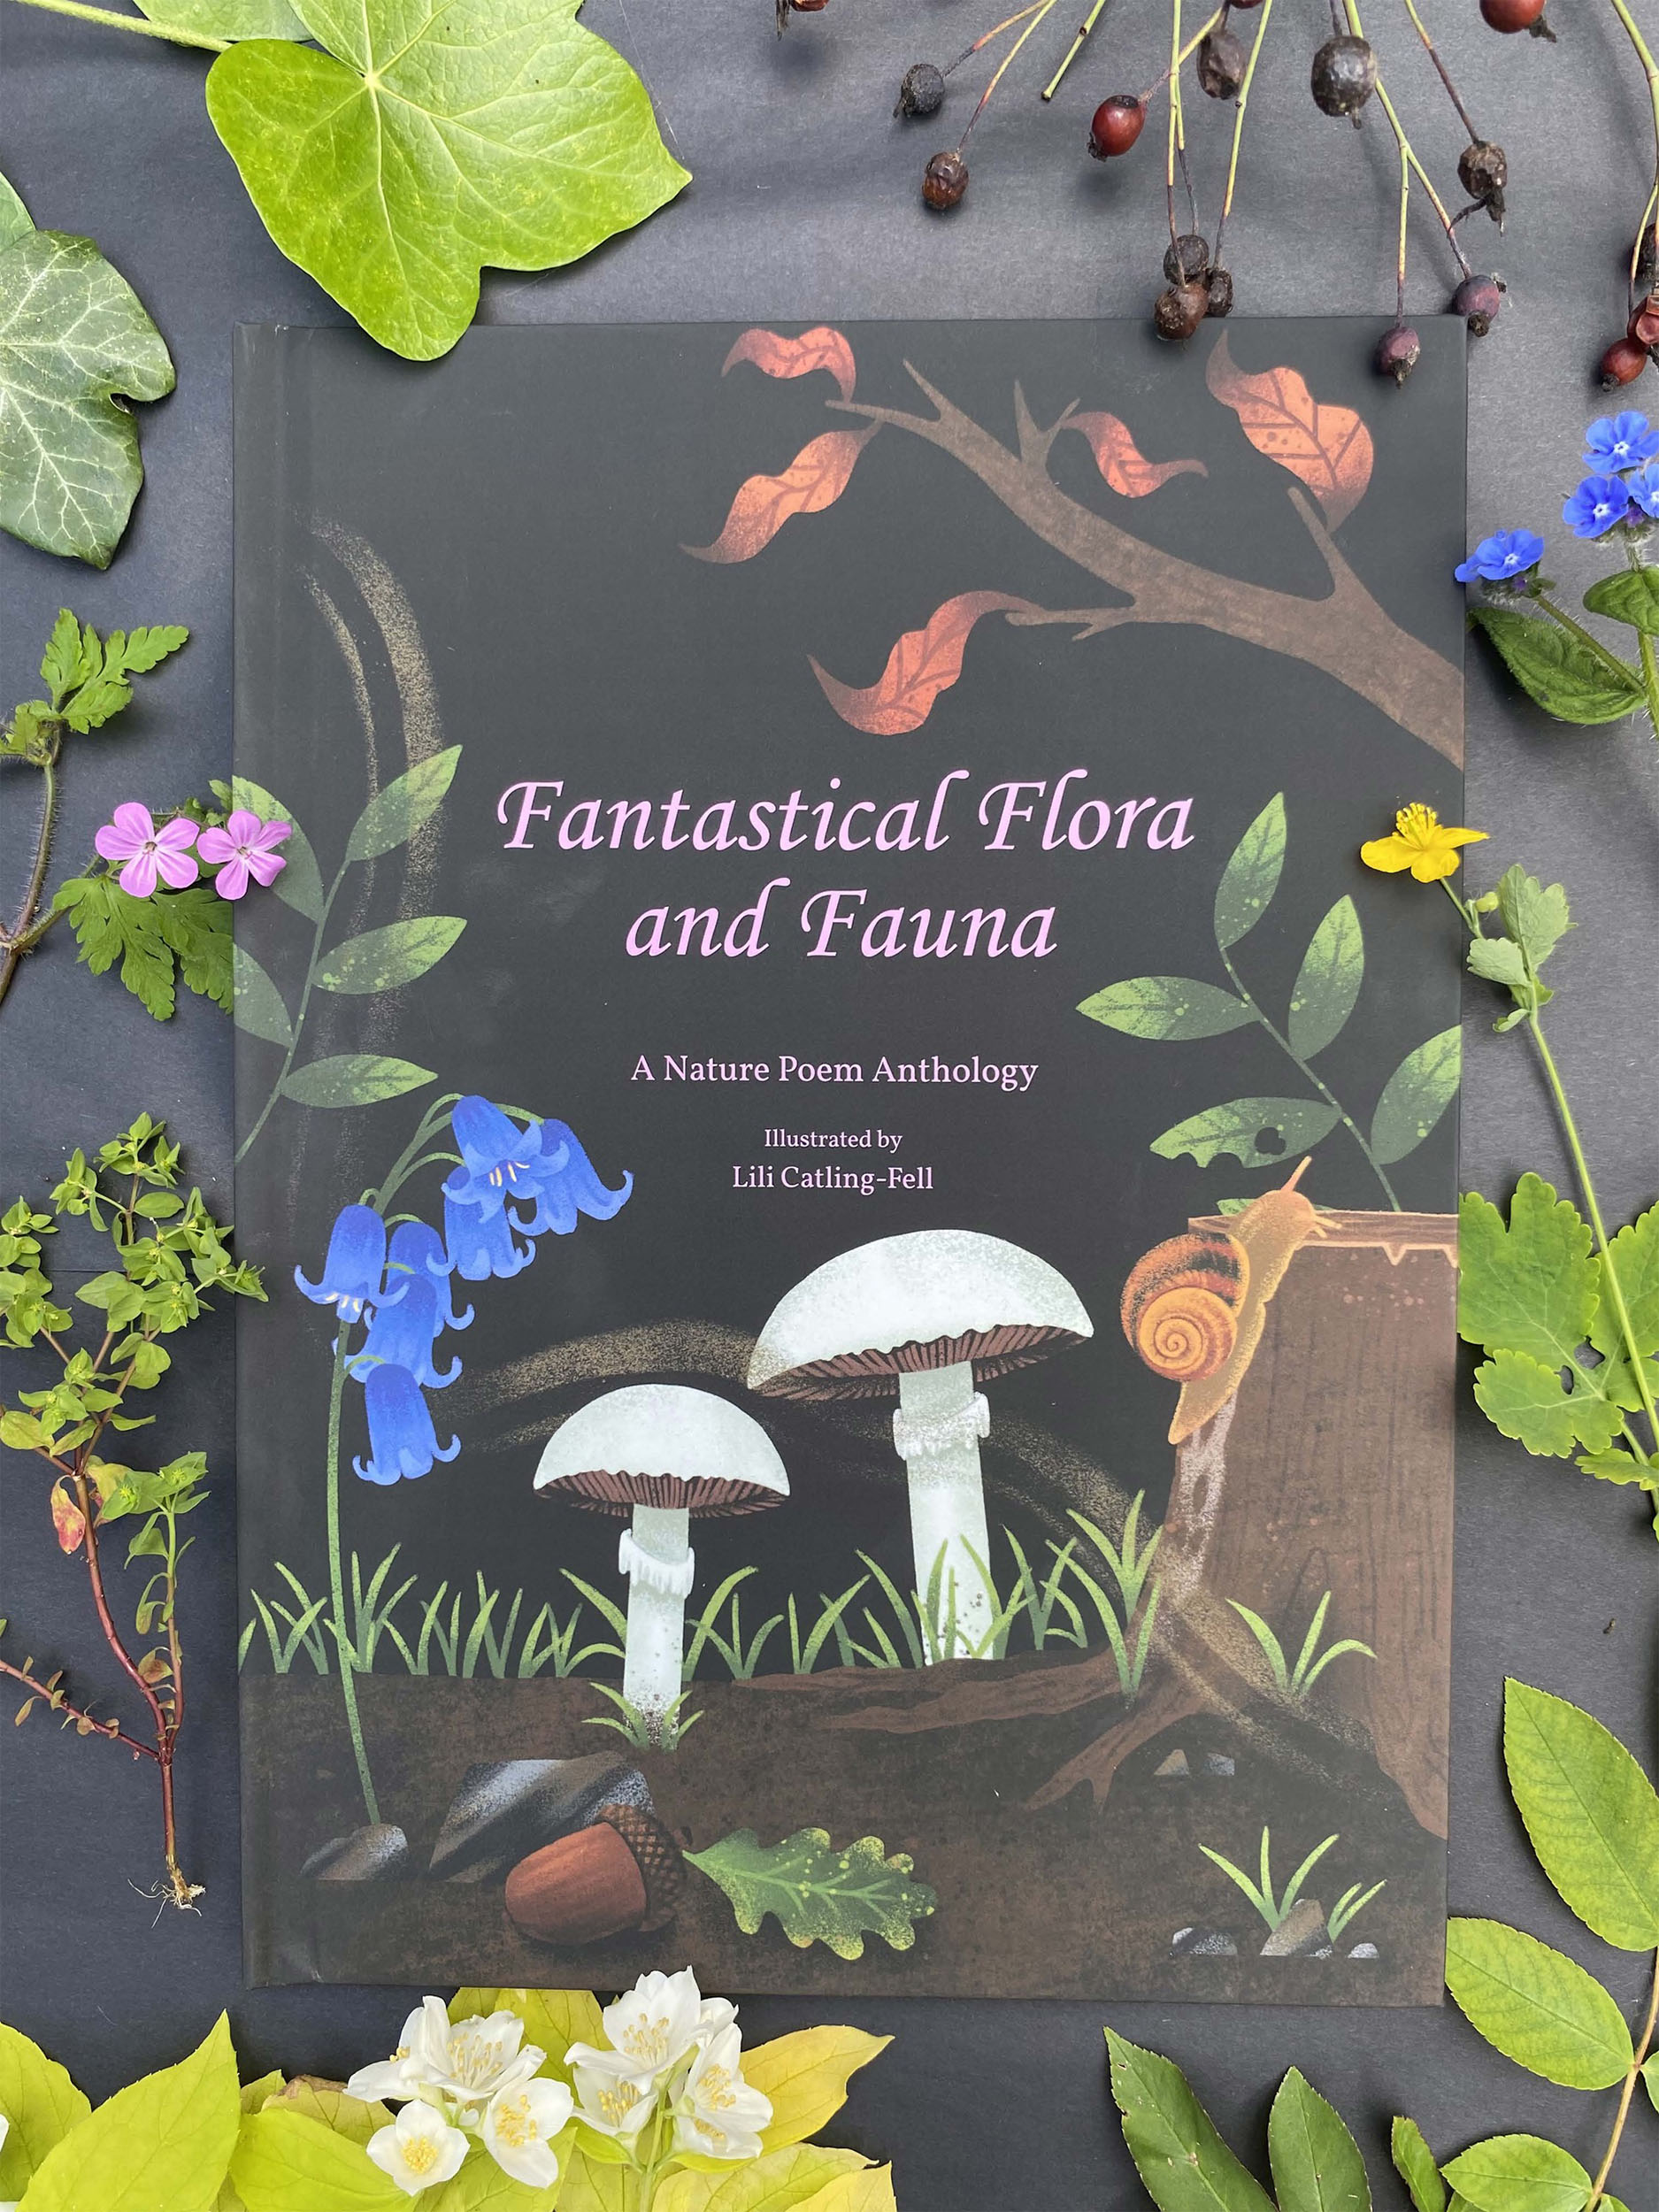 The front cover of my poem anthology "Fantastical Flora and Fauna". Various plants and two mushrooms in front of a black background with a pink title.